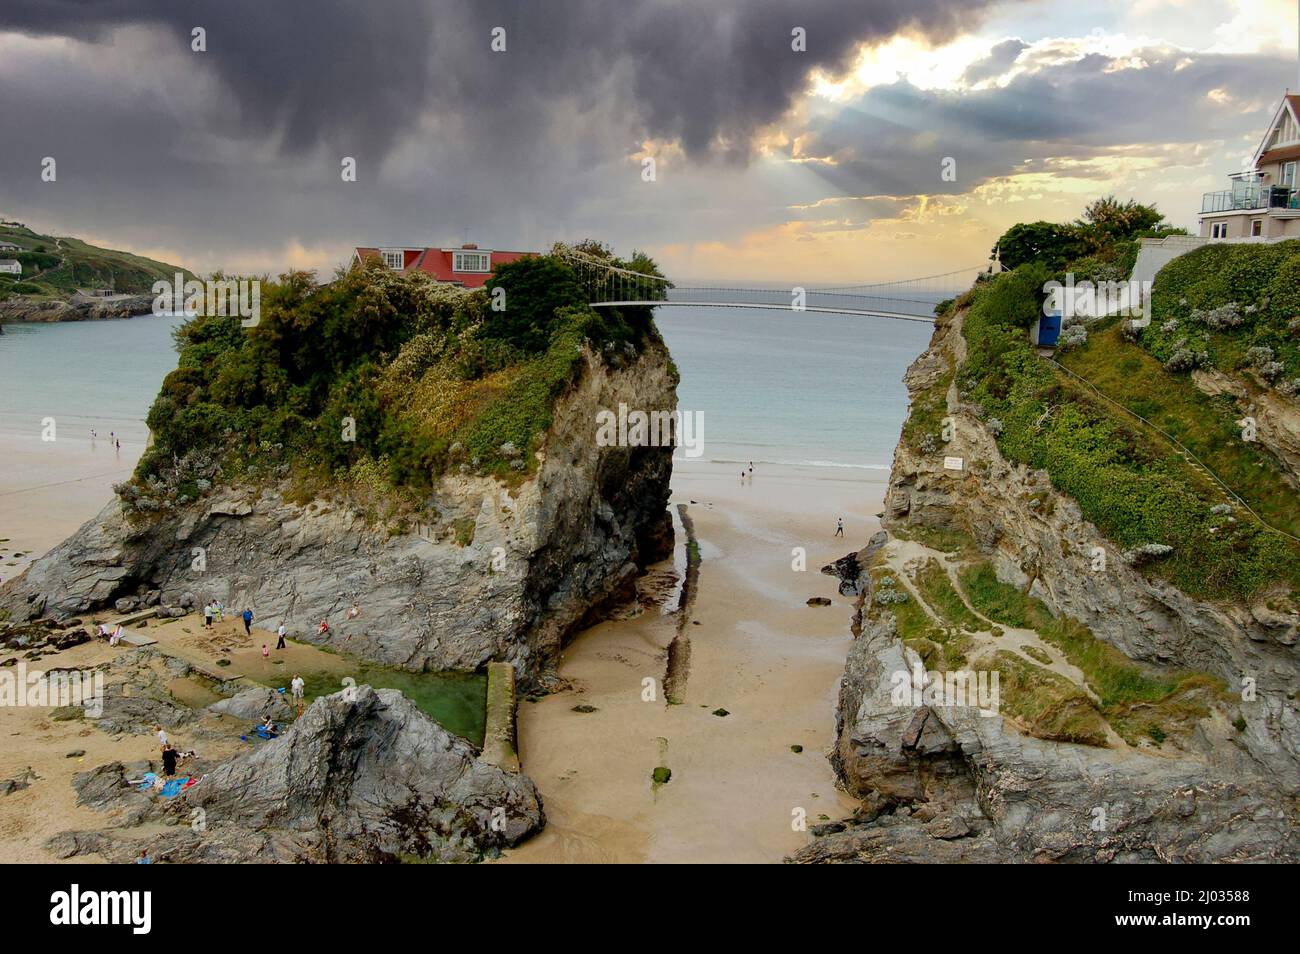 Newquay island, Cornwall. A small footbridge reaching across to a solitary house. Picturesque sandy bay. Stock Photo